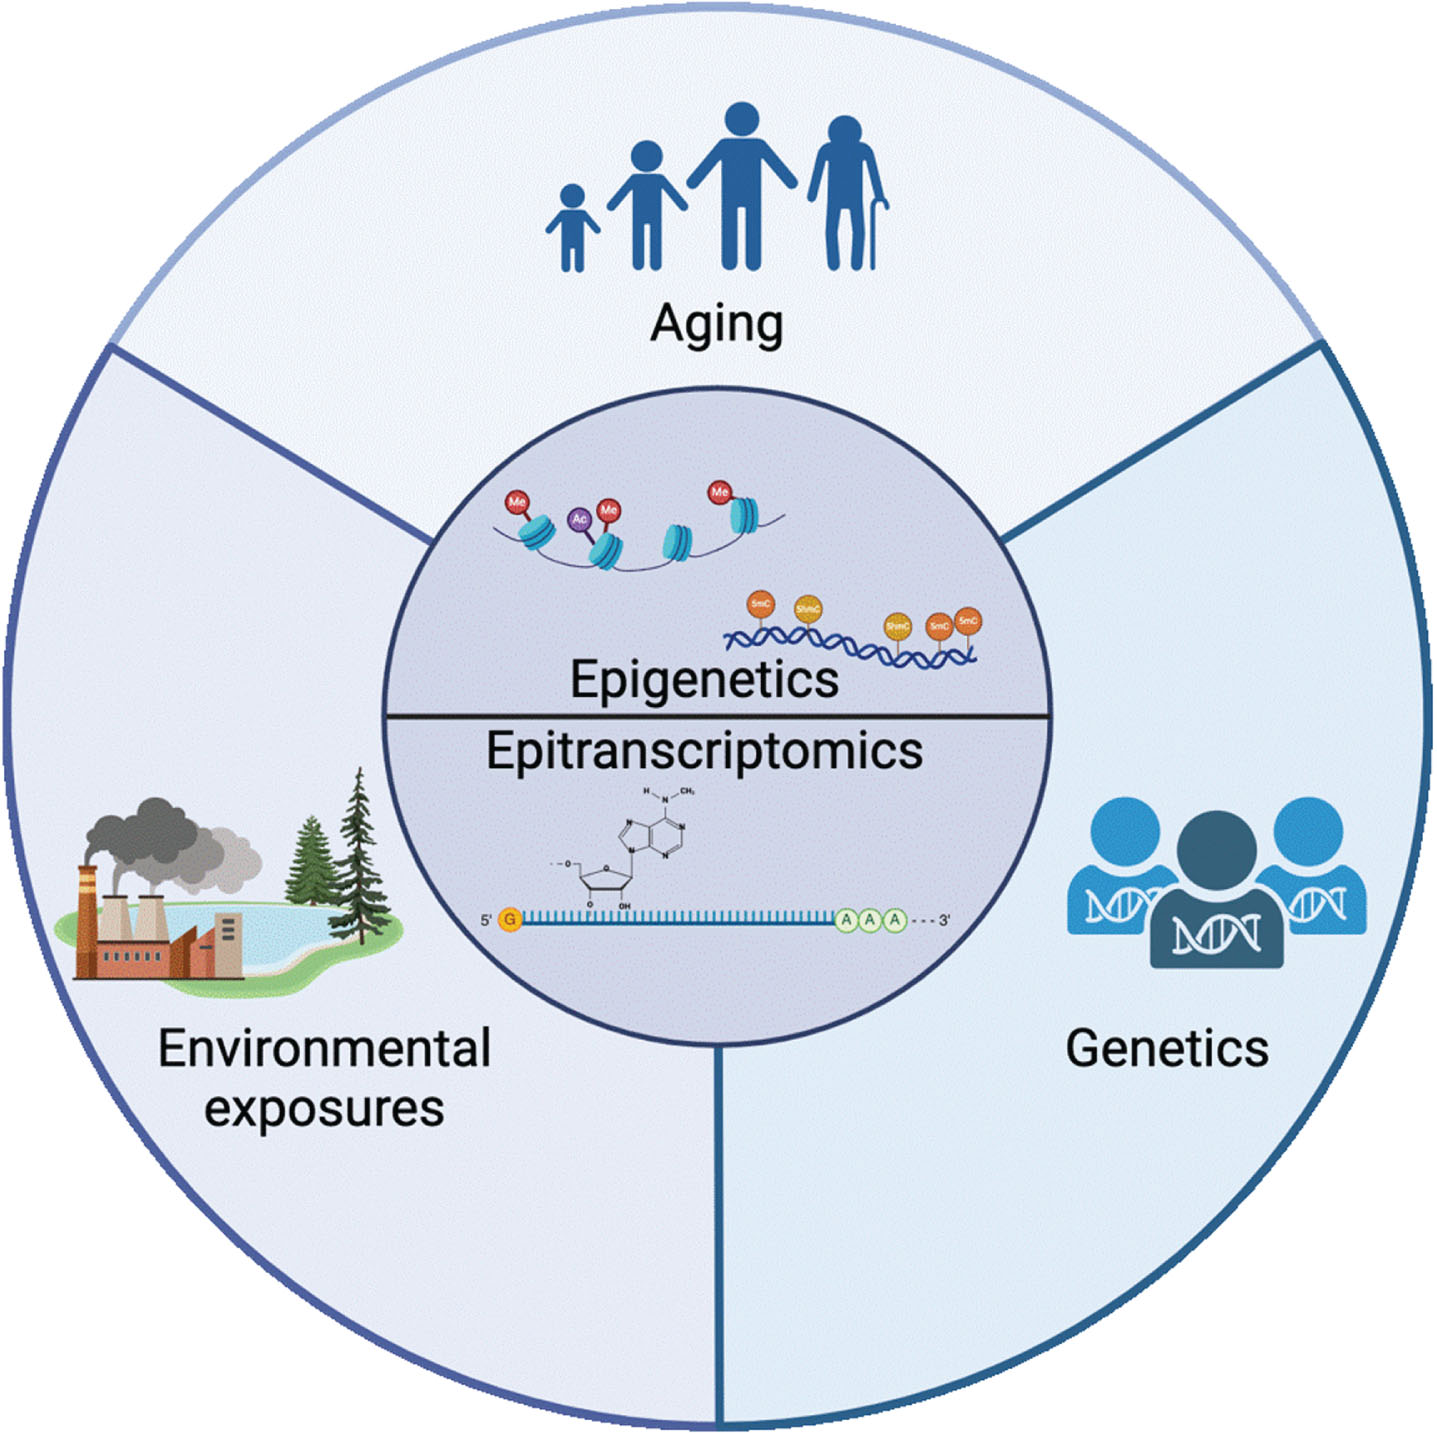 Epigenetics and epitranscriptomics sit at the intersection of the 3 major classes of risk factors for PD: aging, environmental exposure, and genetics. The mechanisms involved in regulating the epigenome and epitranscriptome are mediators of the complex relationship between aging, the environment, and disease. Created with BioRender.com.